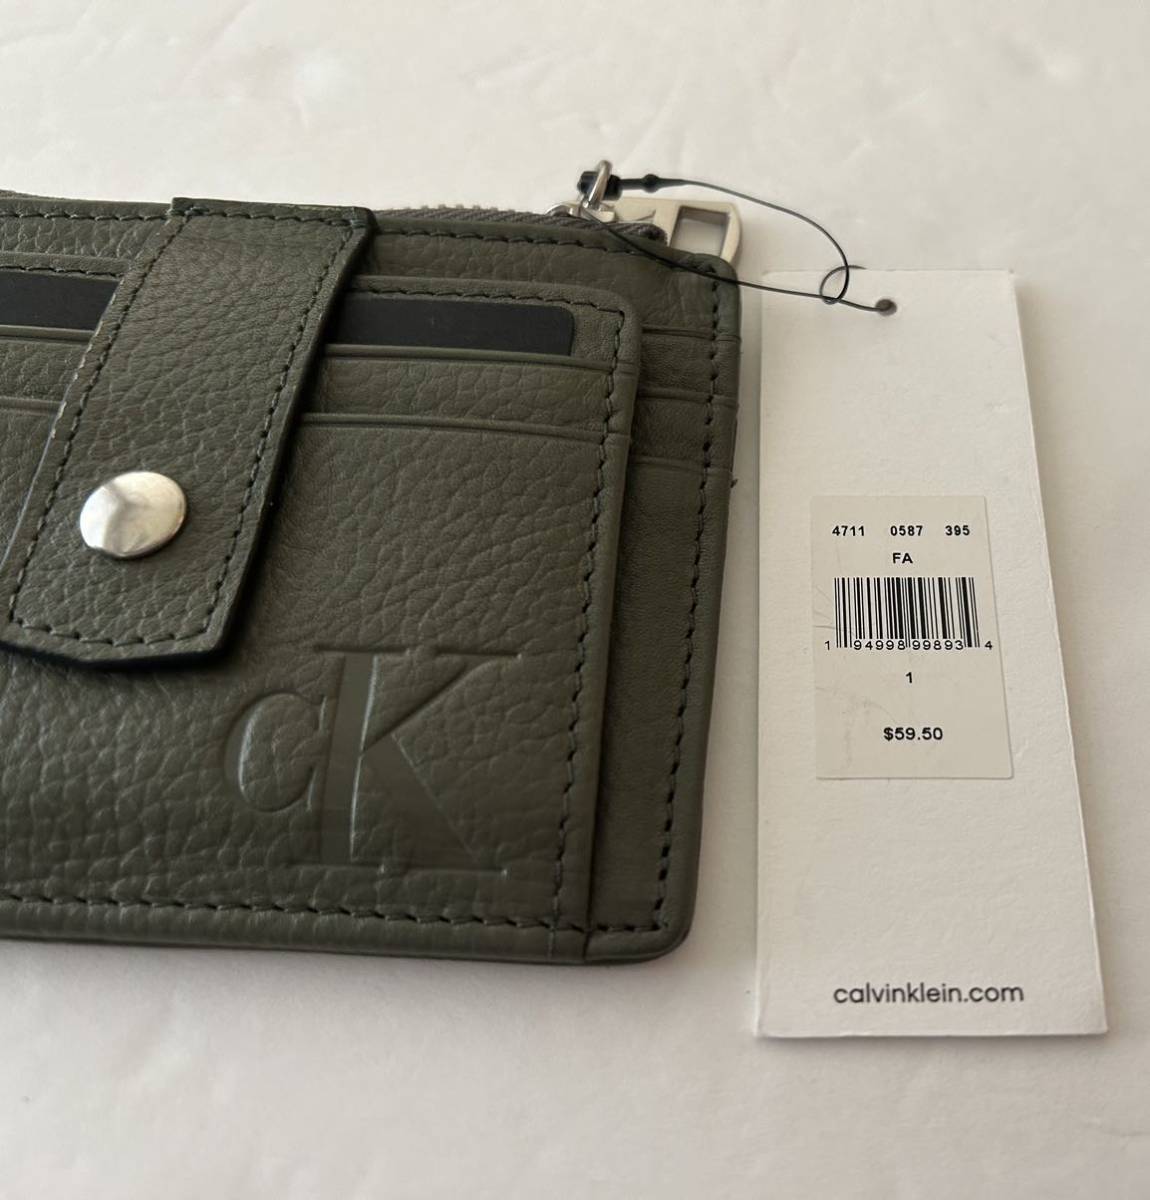 [ free shipping ] new goods #Calvin Klein Calvin Klein men's card inserting change purse . coin case key case pass case ID case olive color 